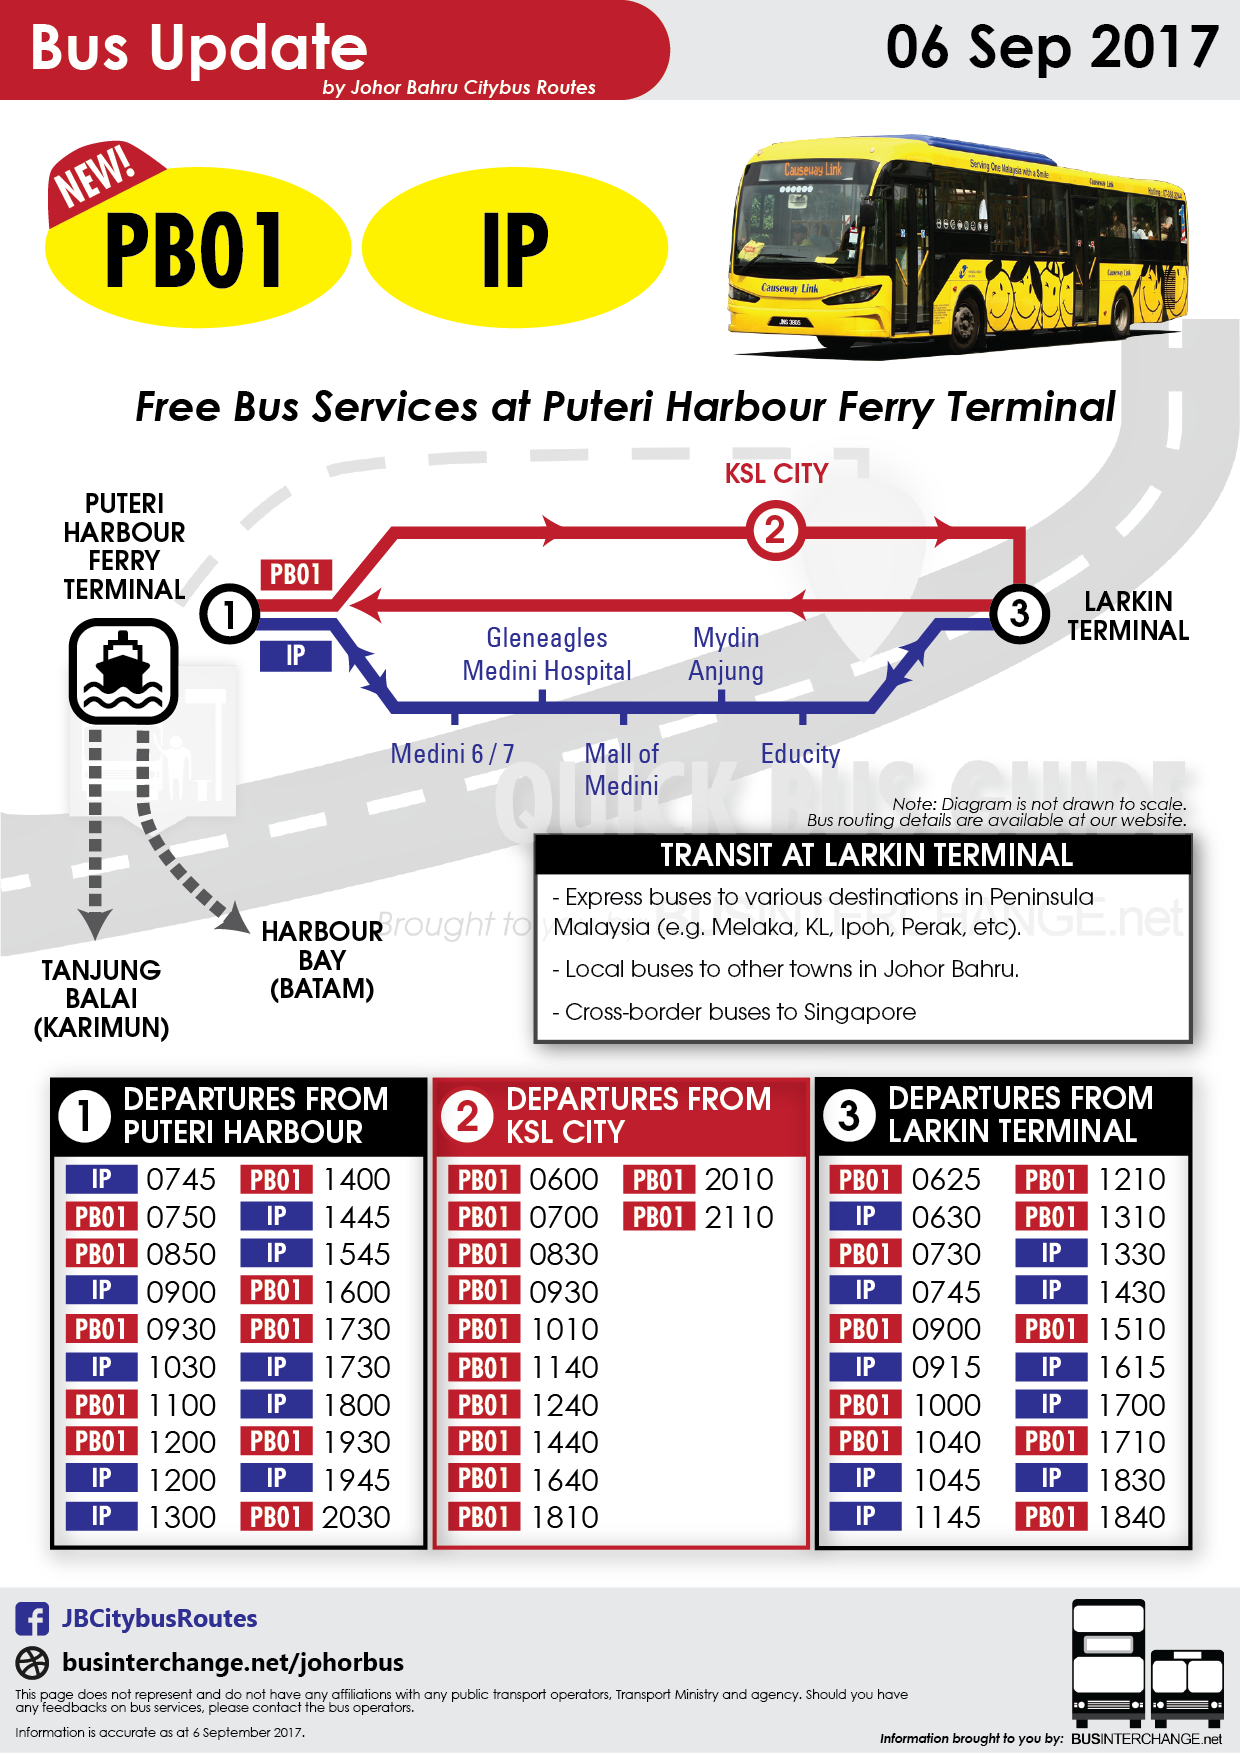 Collated bus timetables for Iskandar Puteri Free Shuttle IP and new bus service PB01.